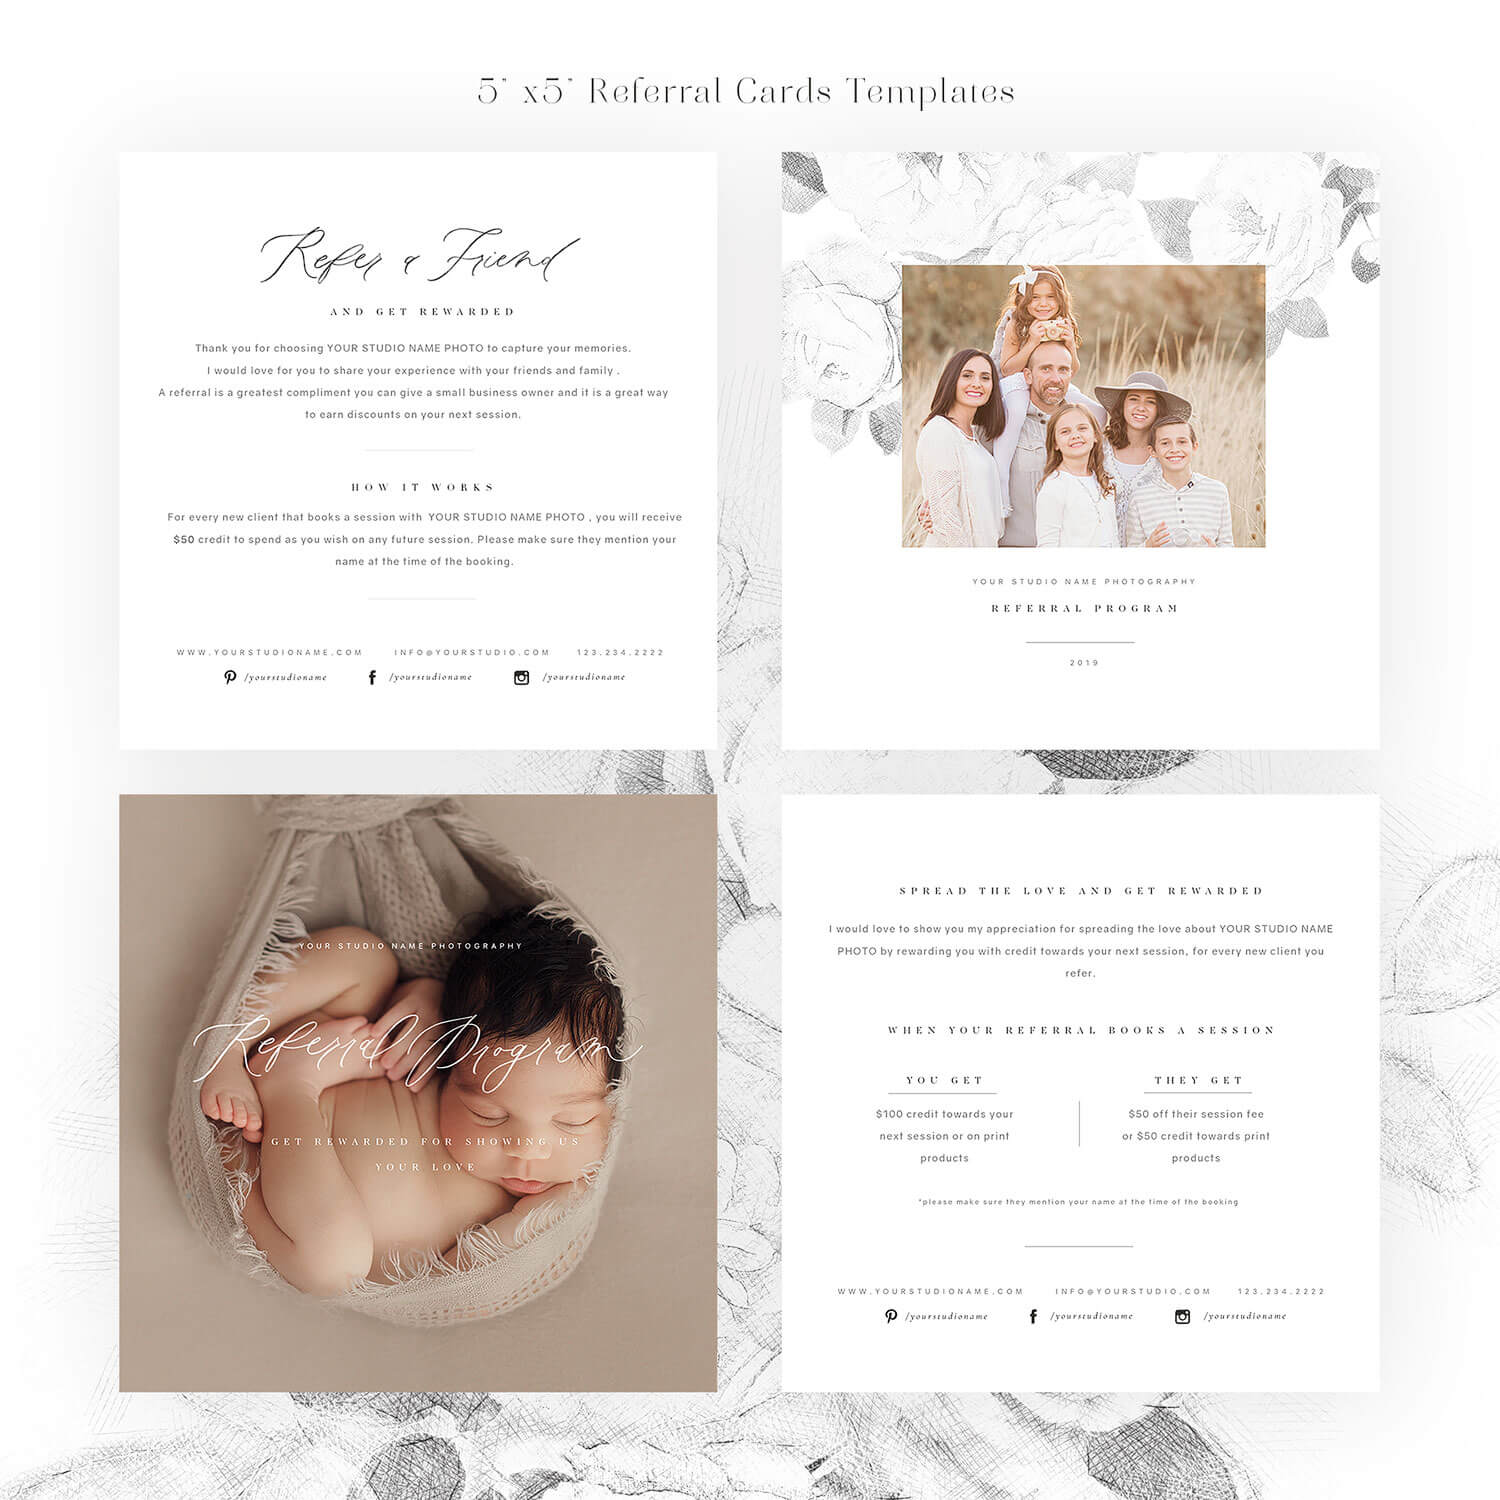 Referral Love 5×5 Card Templates Throughout Photography Referral Card Templates